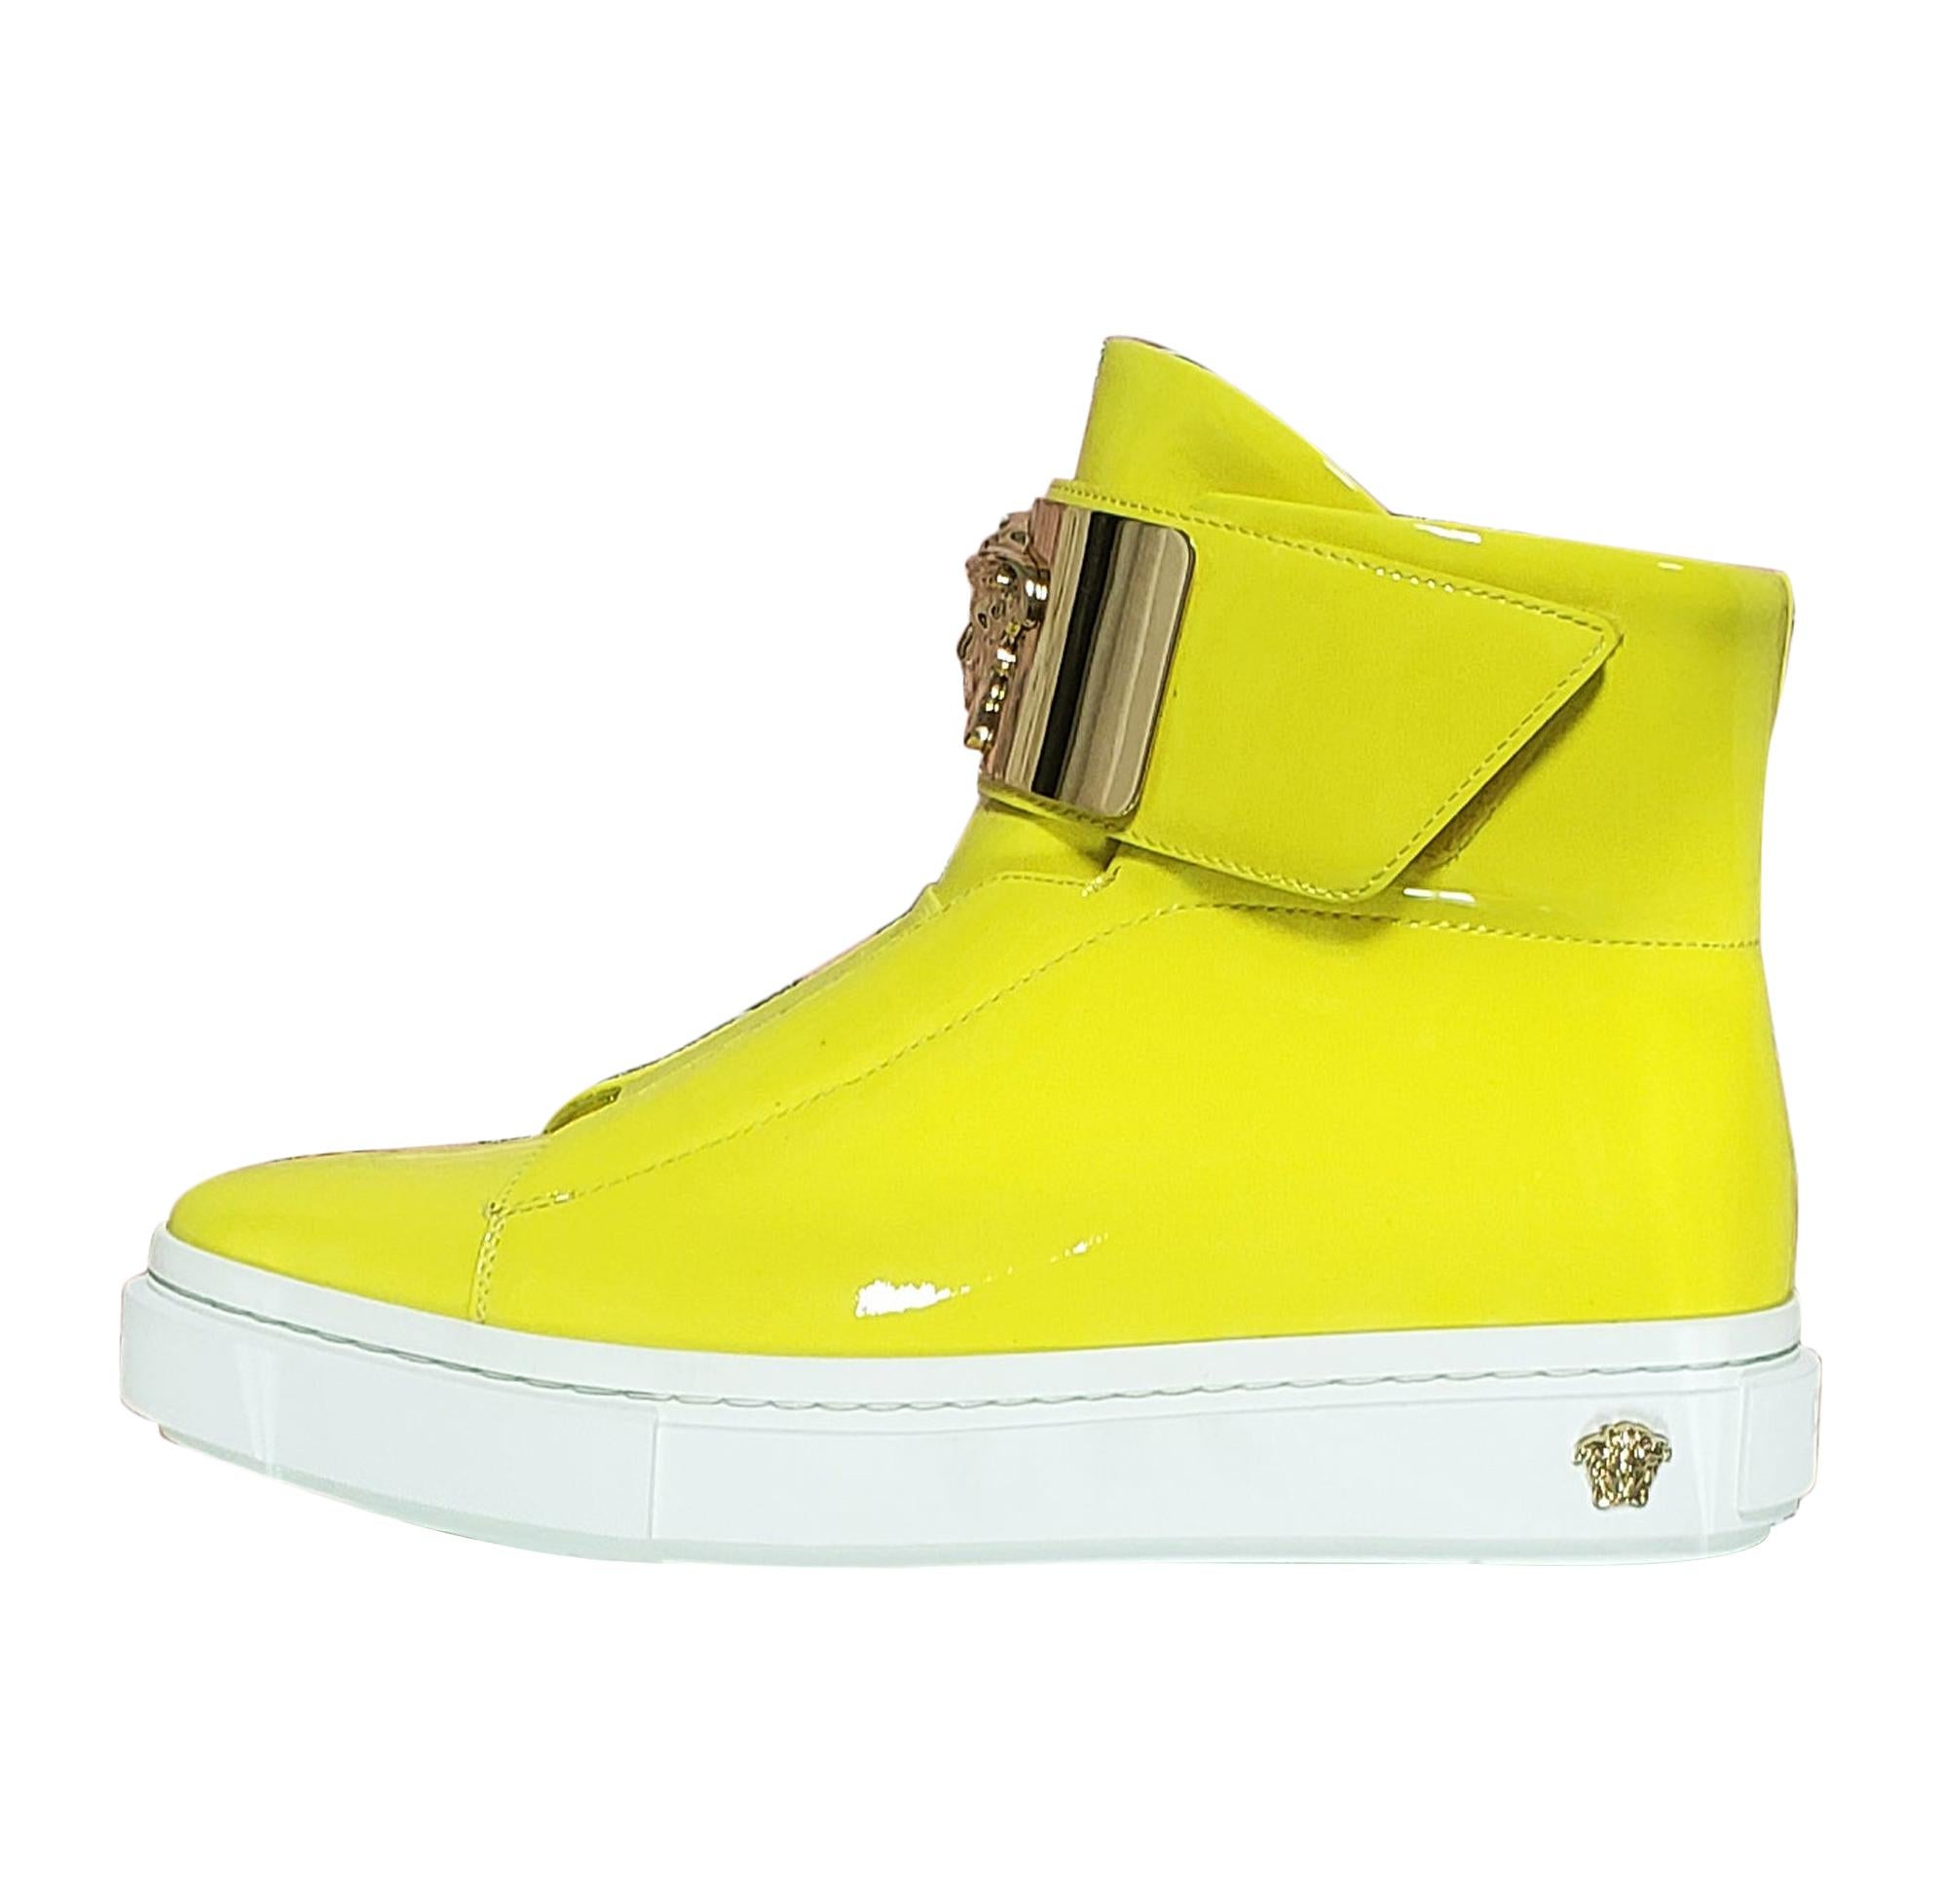 VERSACE Yellow Patent Leather Fashion Sneakers